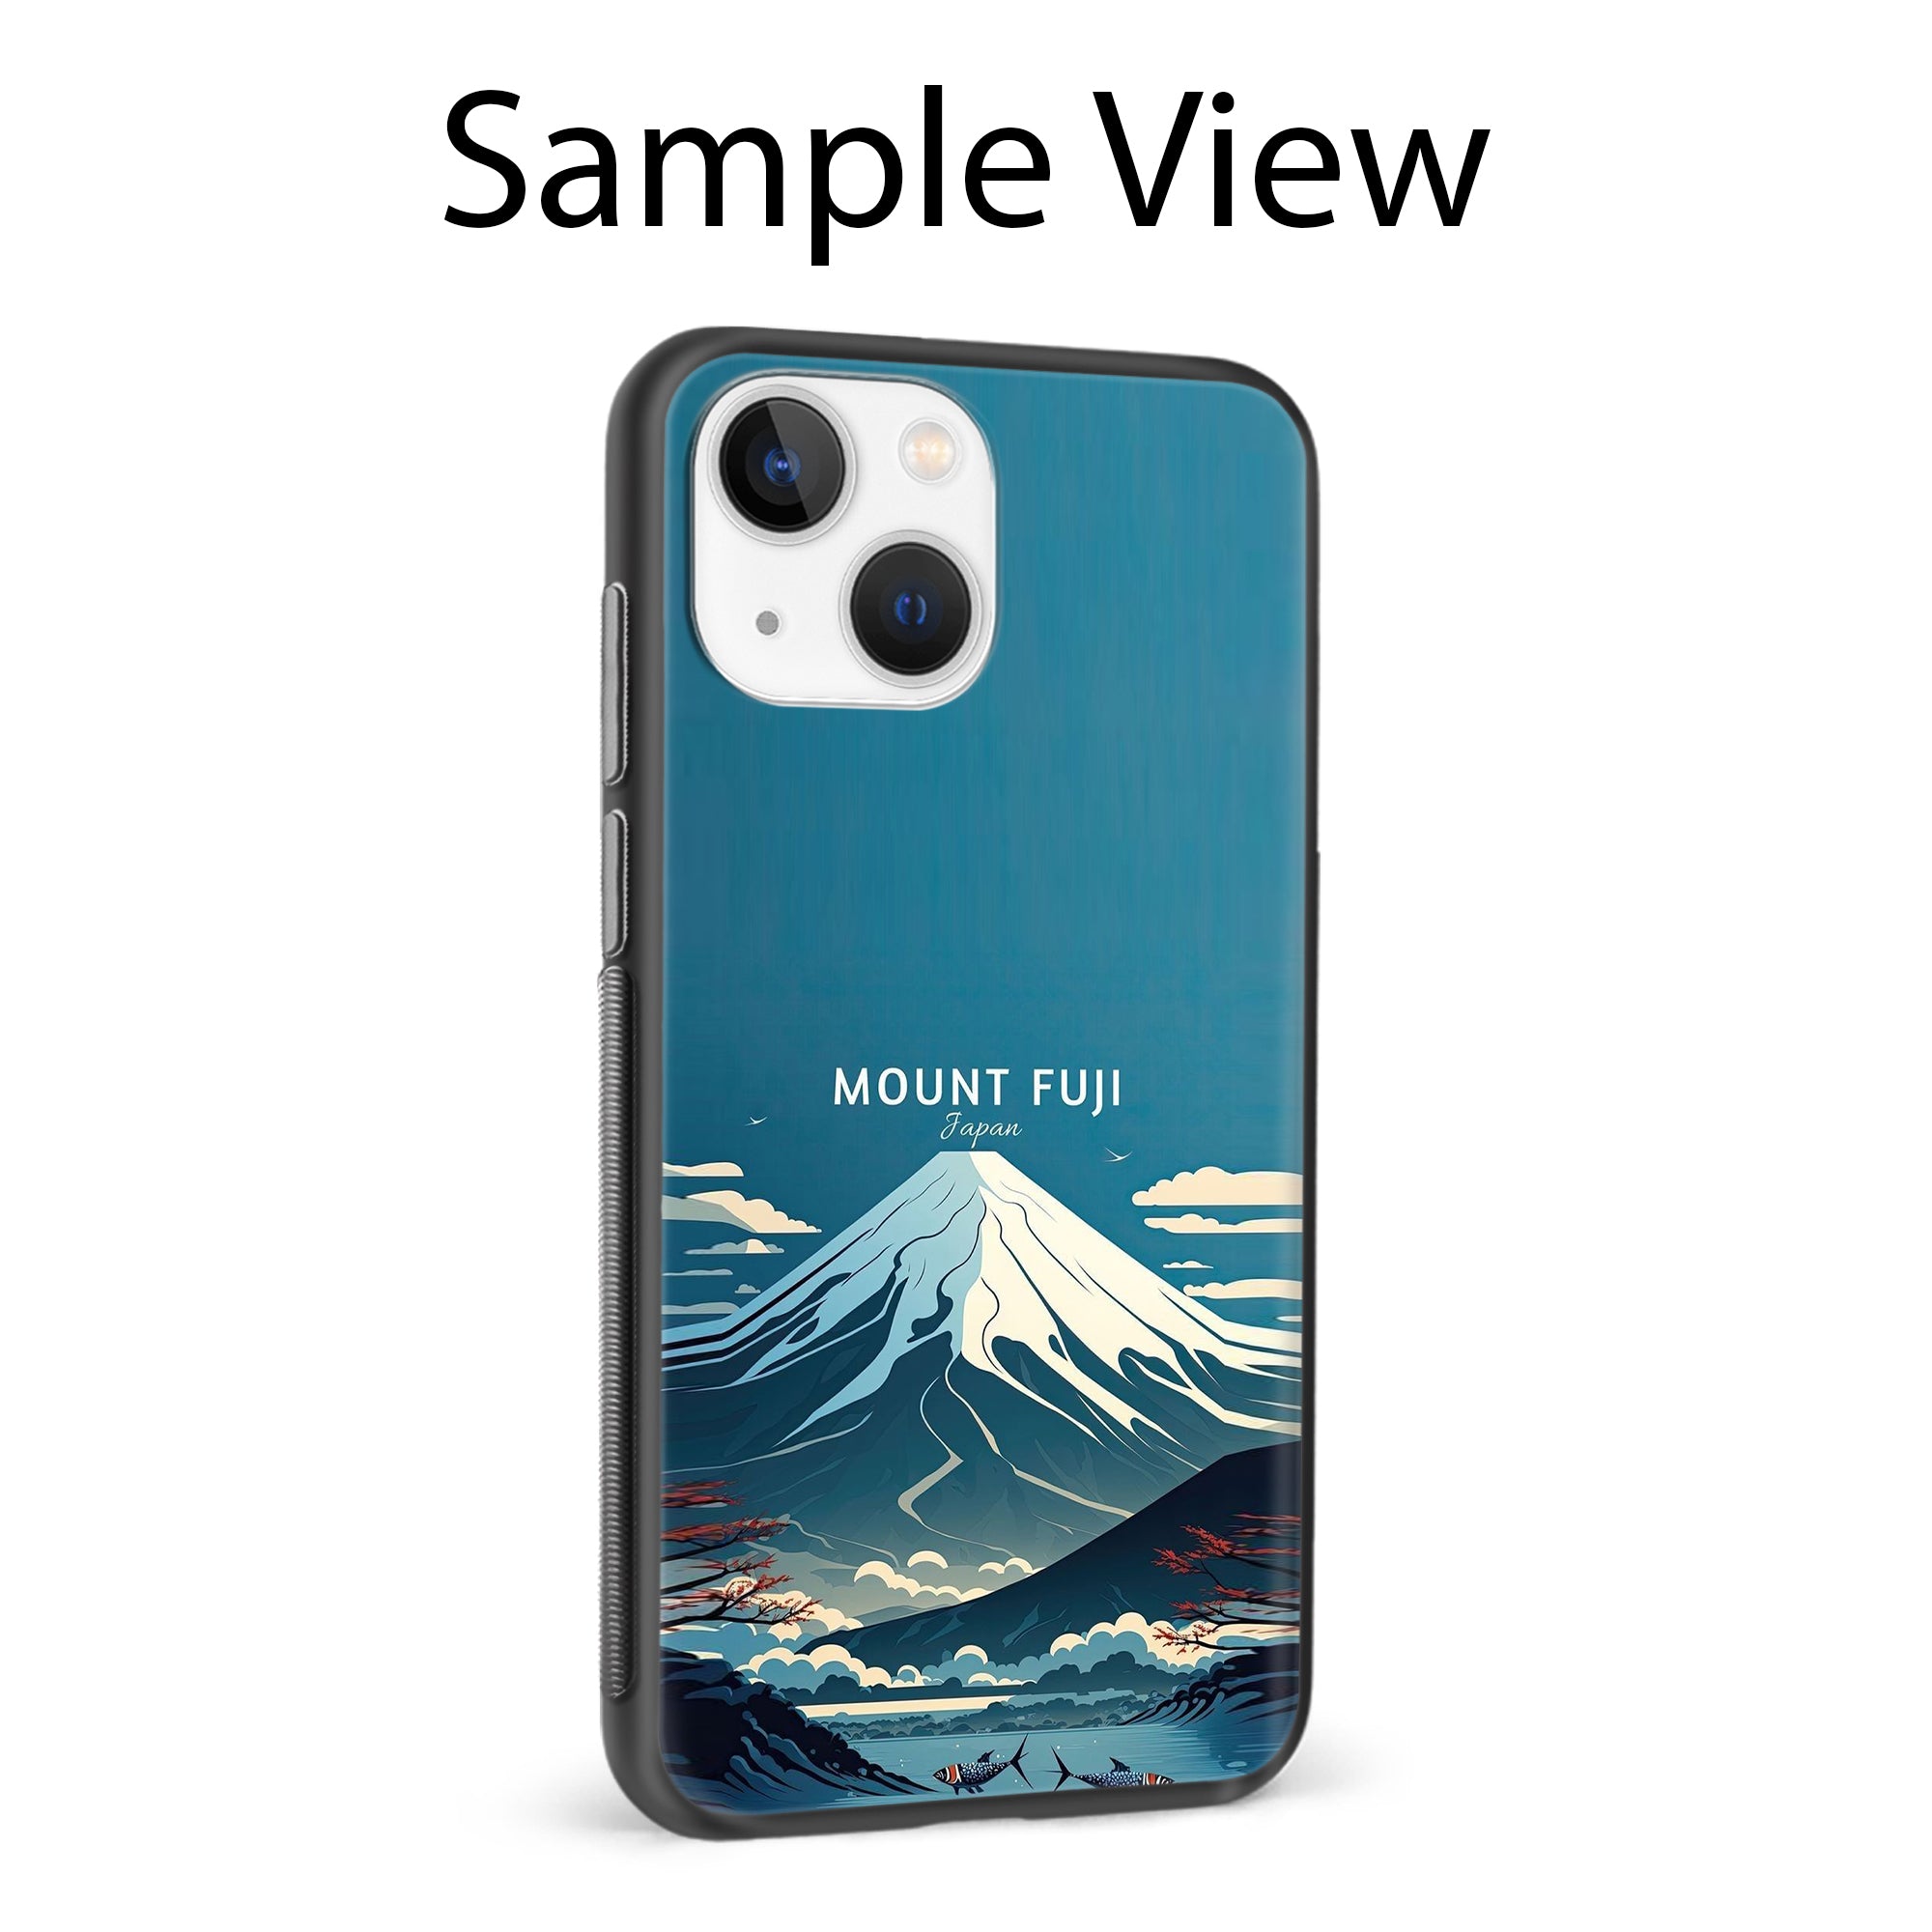 Buy Mount Fuji Glass/Metal Back Mobile Phone Case/Cover For Apple iPhone 12 pro max Online